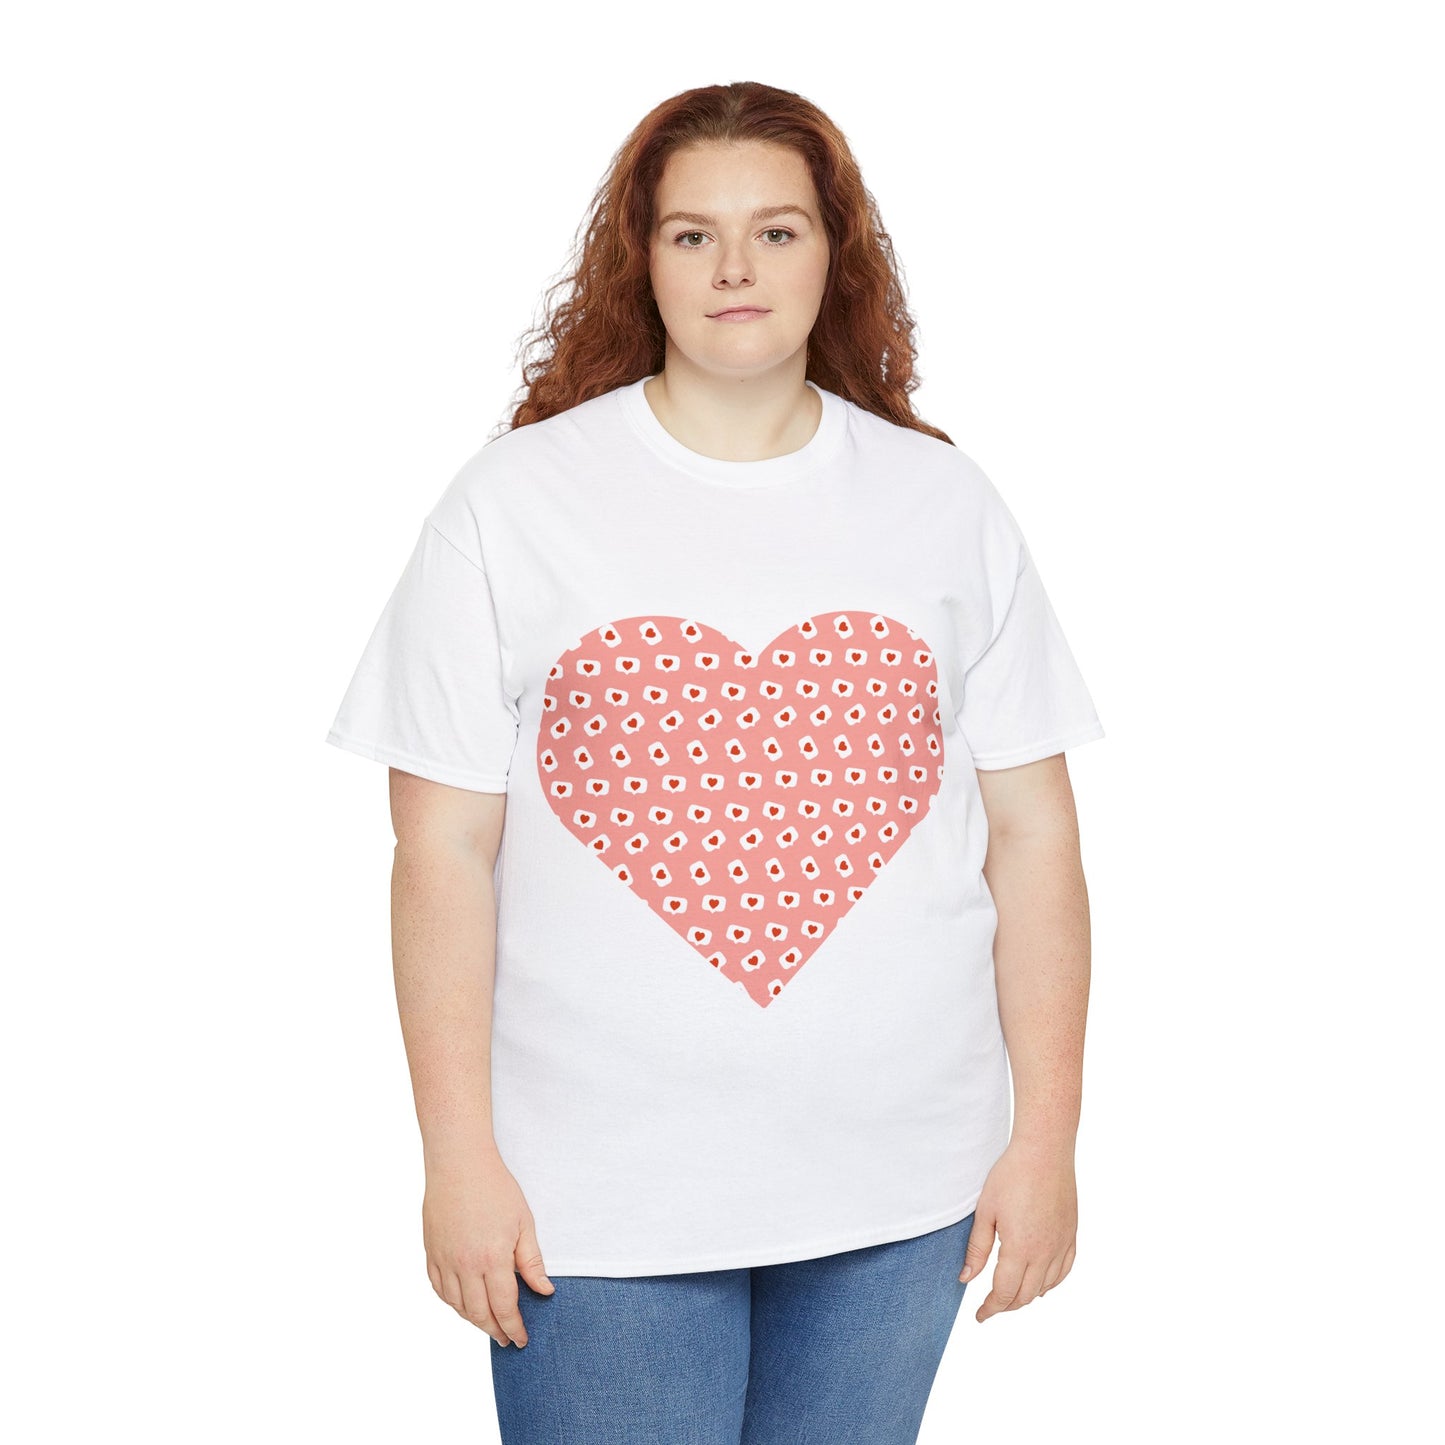 Heart Thought Bubble T-shirt: Wear Your Thoughts with Style